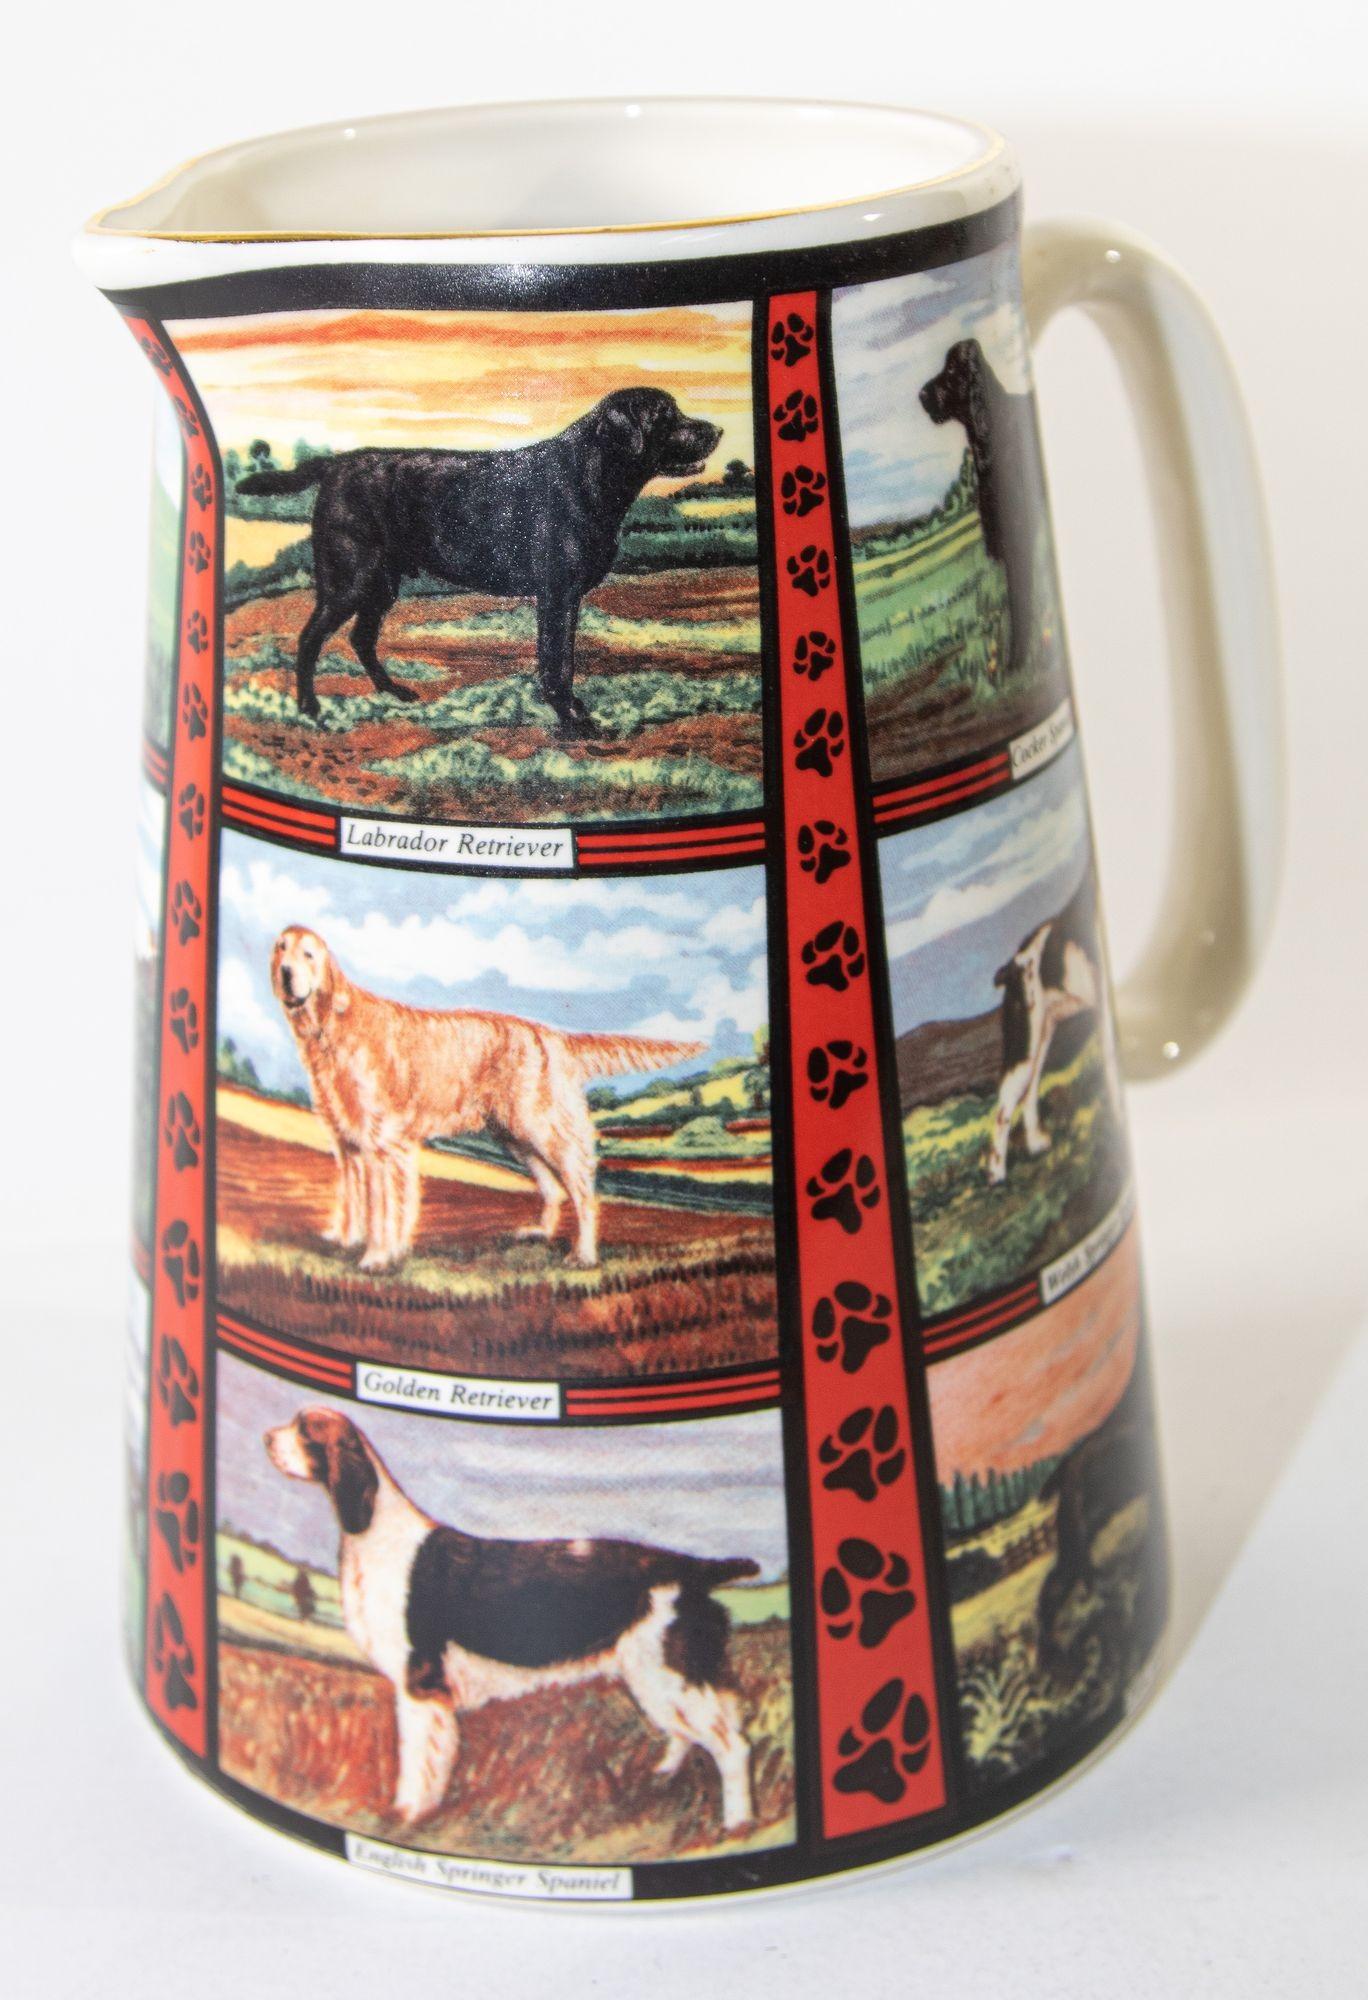 Vintage 1970s Ceramic Pitcher, Derbyshire England with Dog Breeds Design.
Large English ironstone transfer printed large decorative pitcher
Whimsical bright and beautiful 1970's Derbyshire vintage pottery Jug.
Printed with colorful images of